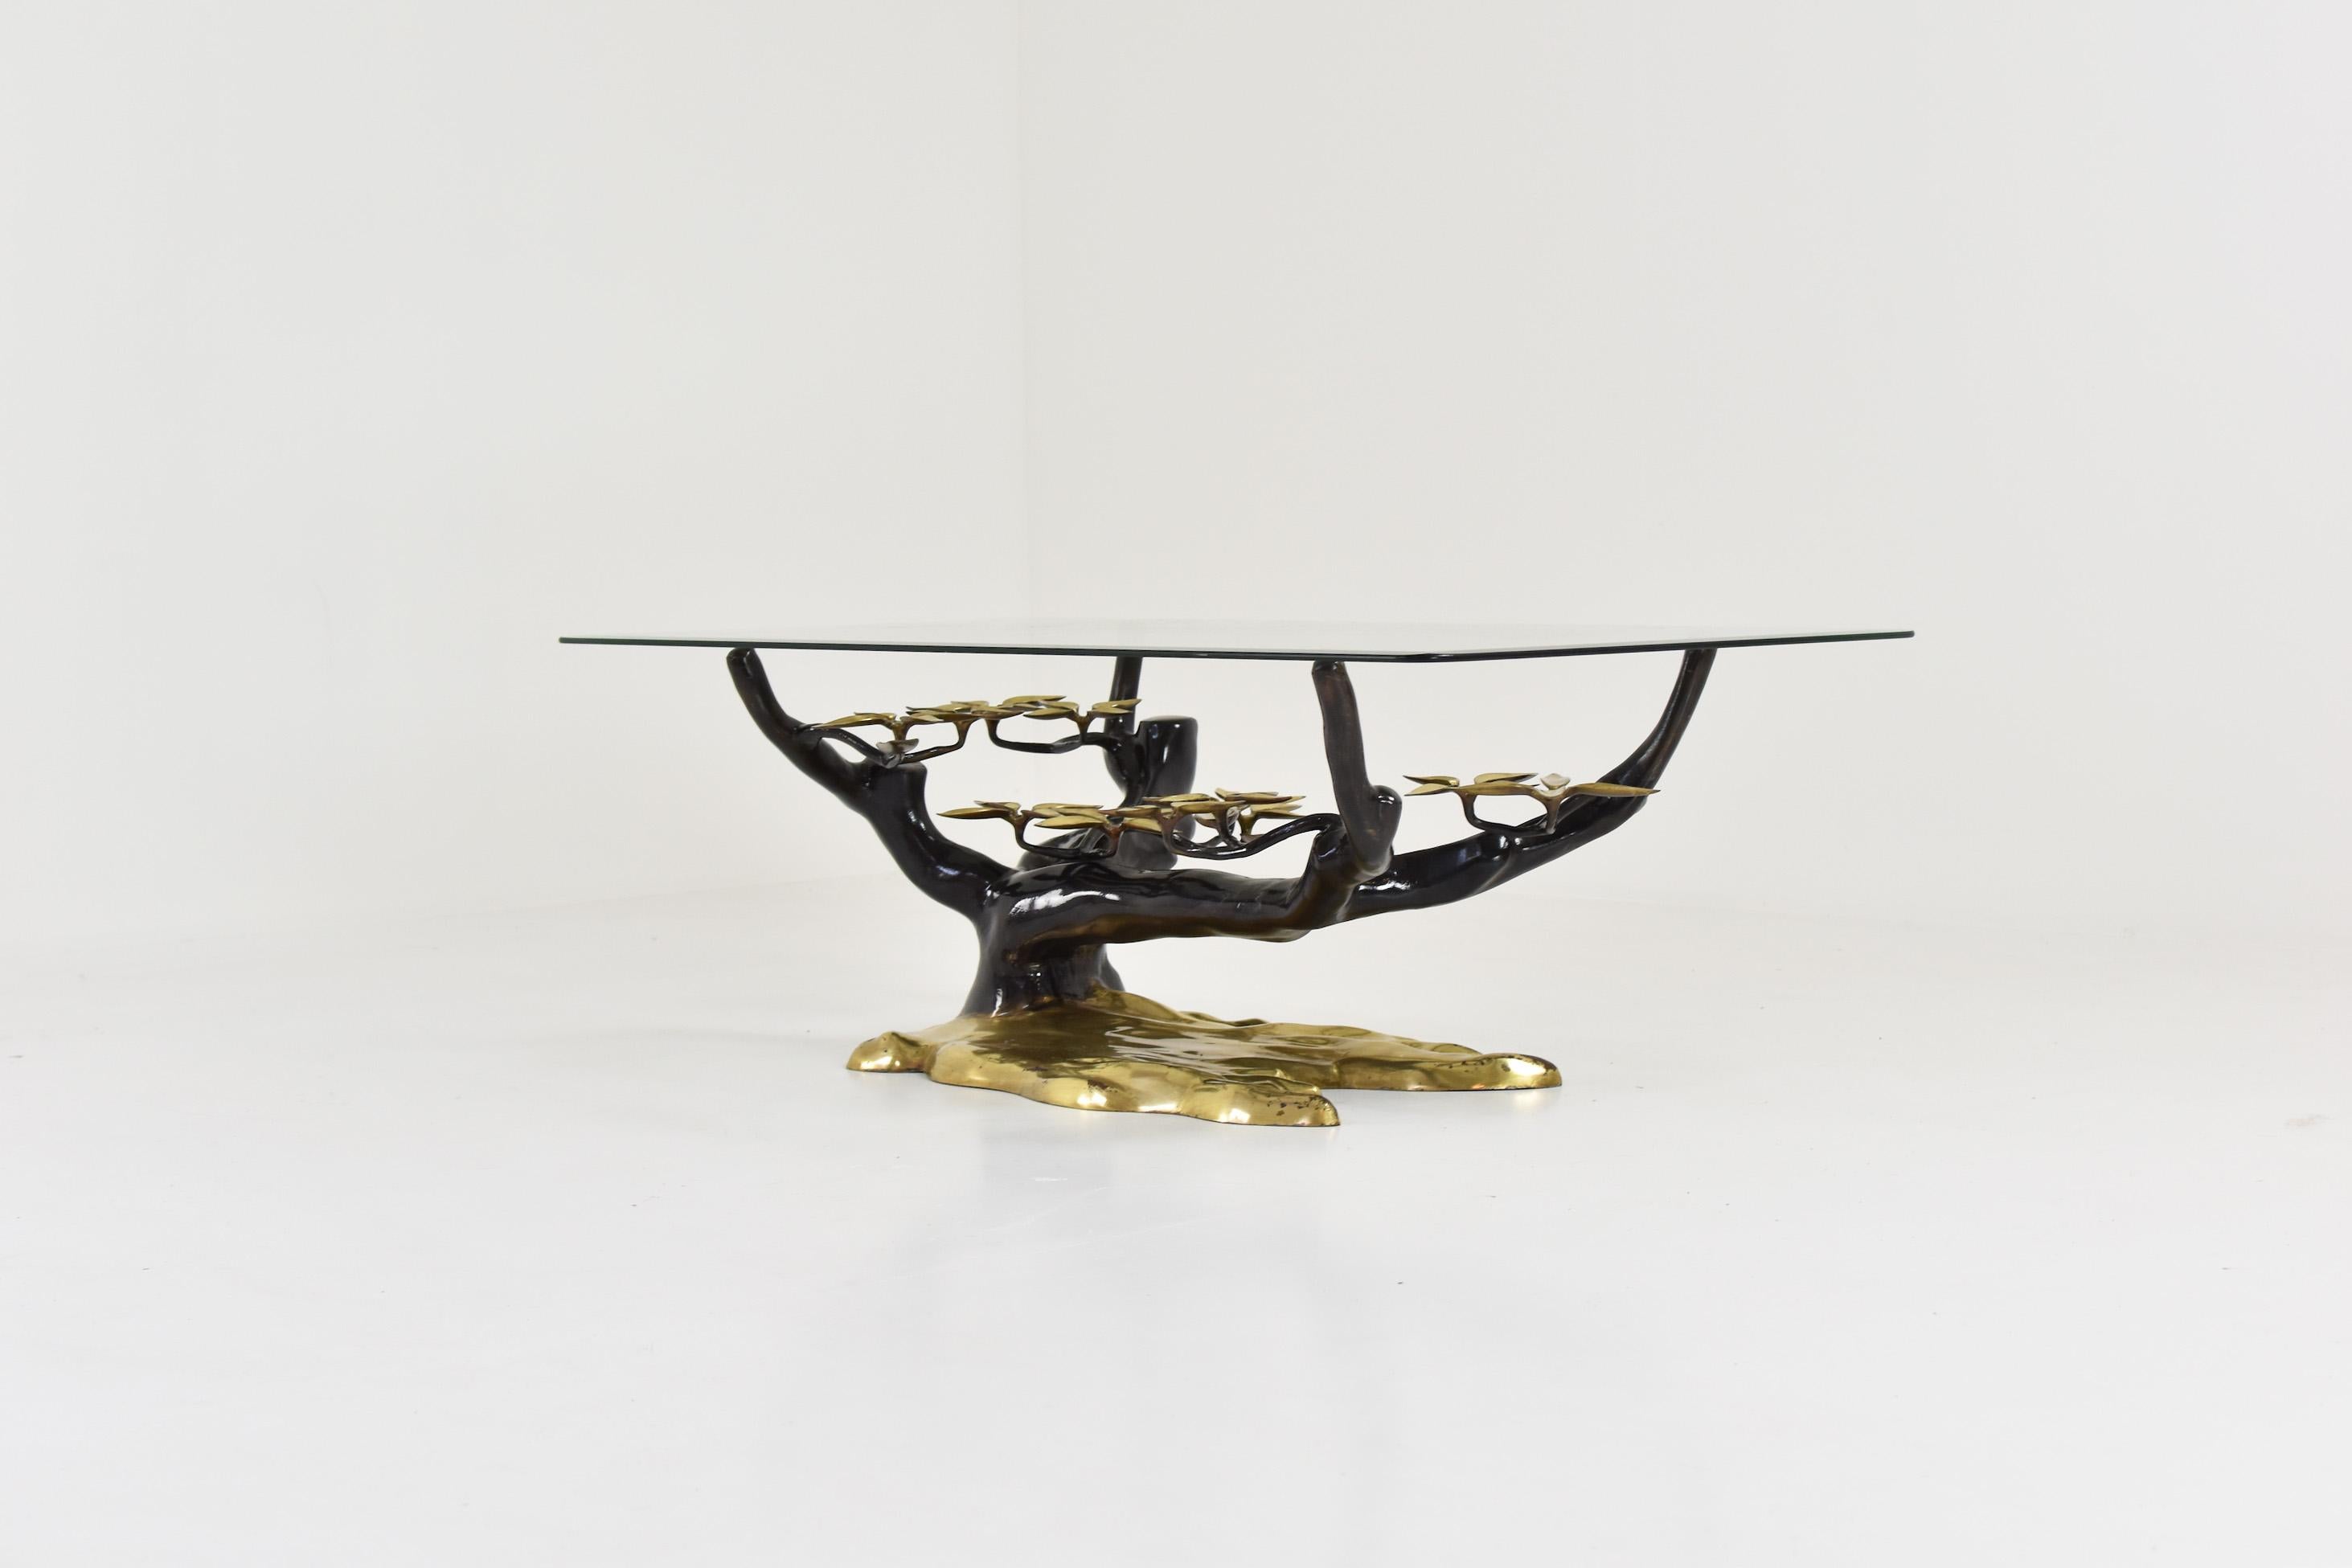 Elegant Bonsai tree coffee table by Willy Daro, Belgium, 1970s. This sculptural coffee table features a patinated brass base and a clear beveled glass table top. Very good original condition.